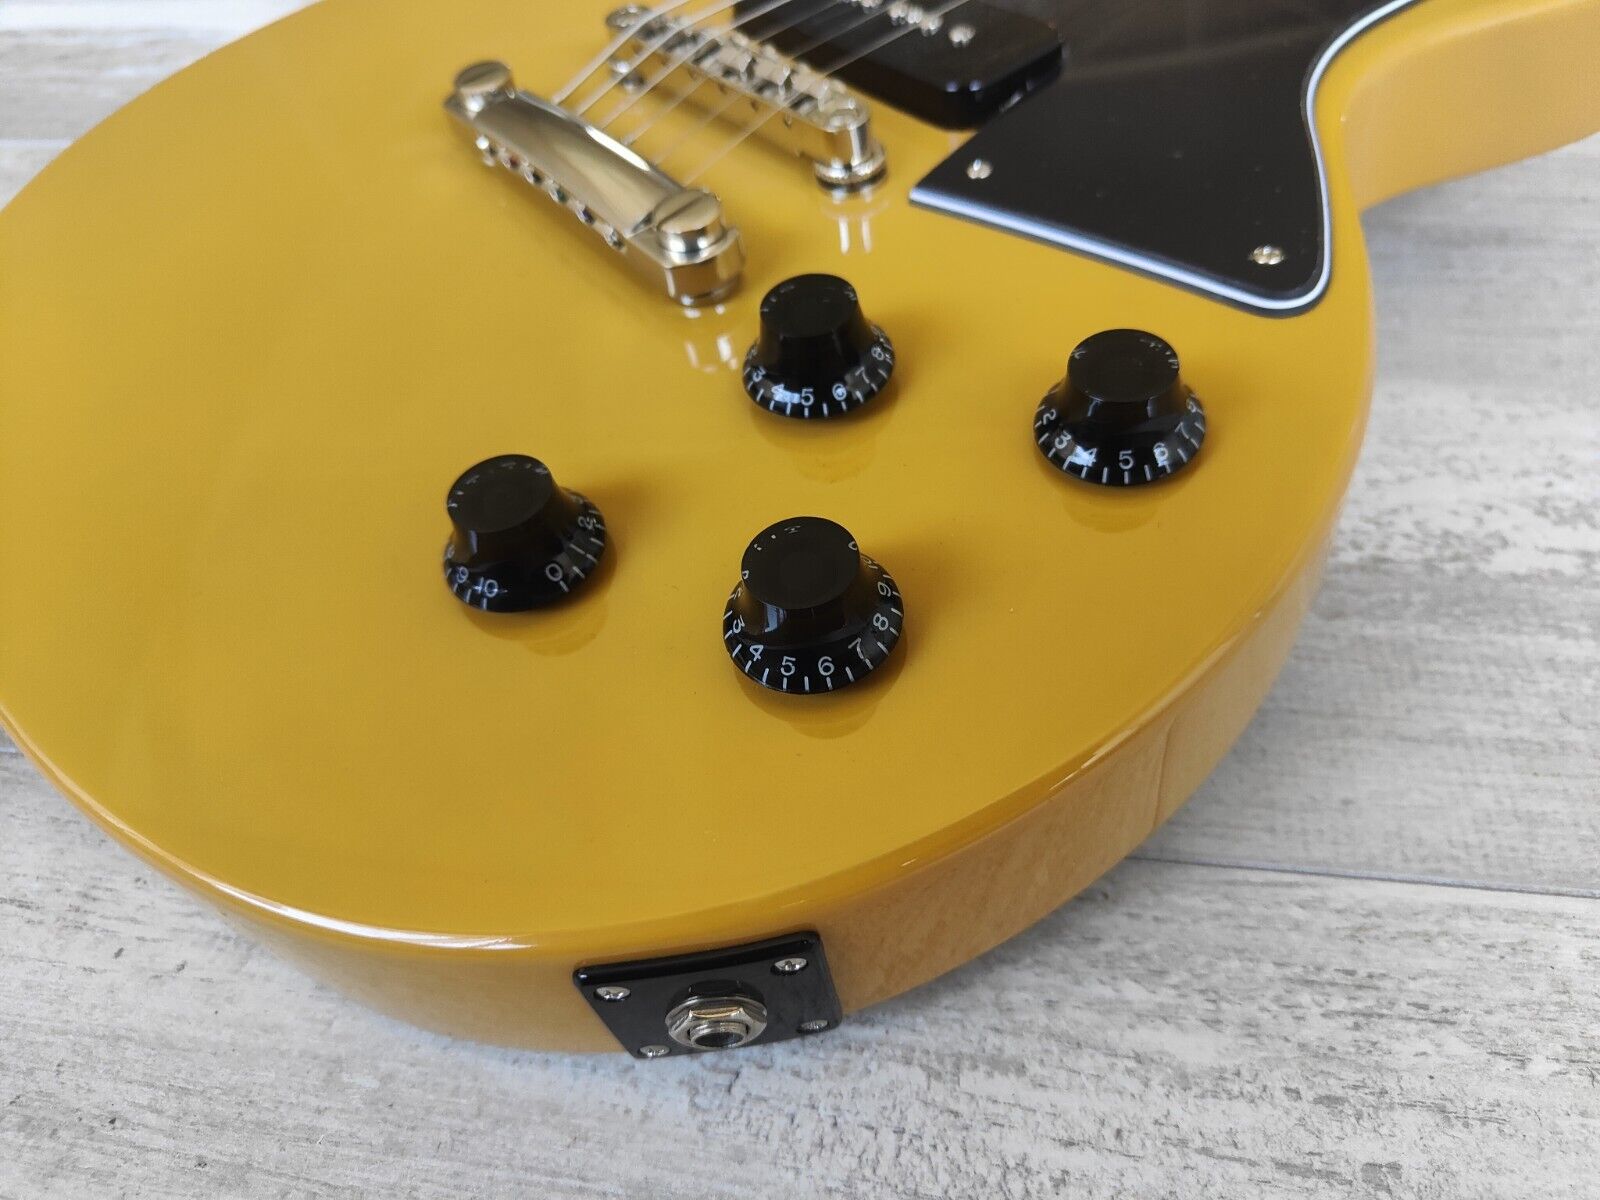 2018 Epiphone Les Paul Special SC Pro Limited Edition (TV Yellow)